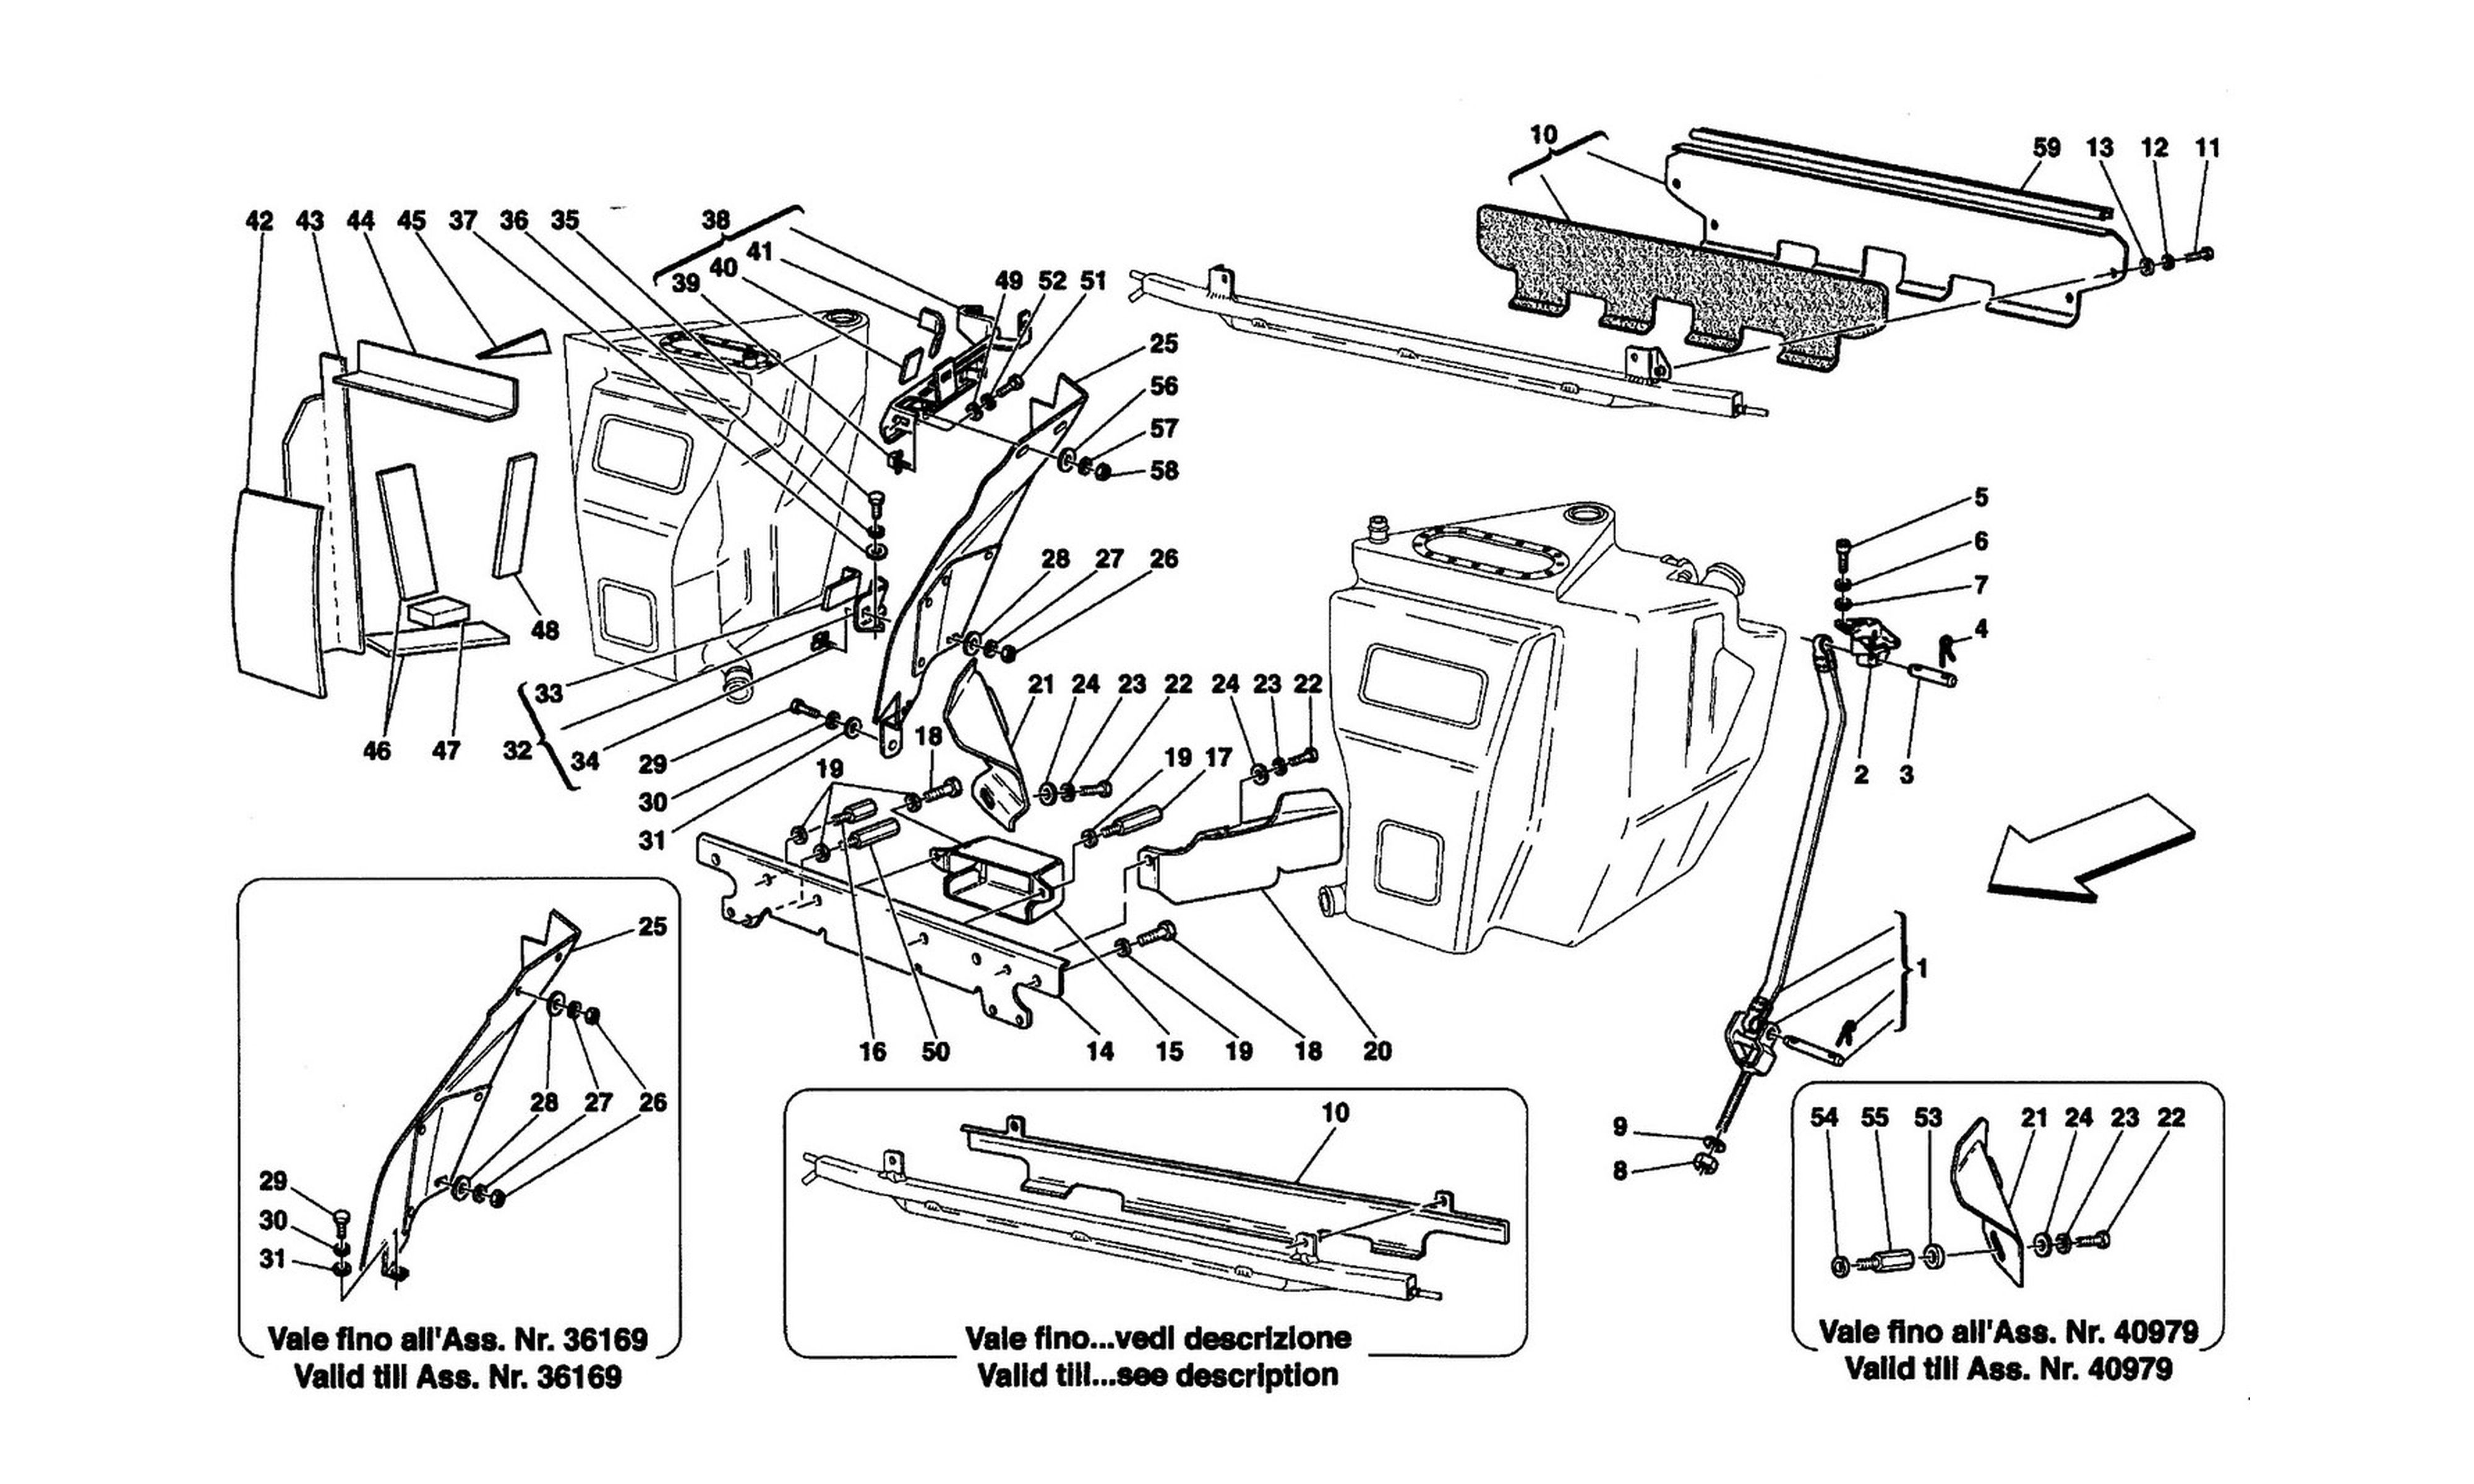 Schematic: Fuel Tanks - Fixing And Protection